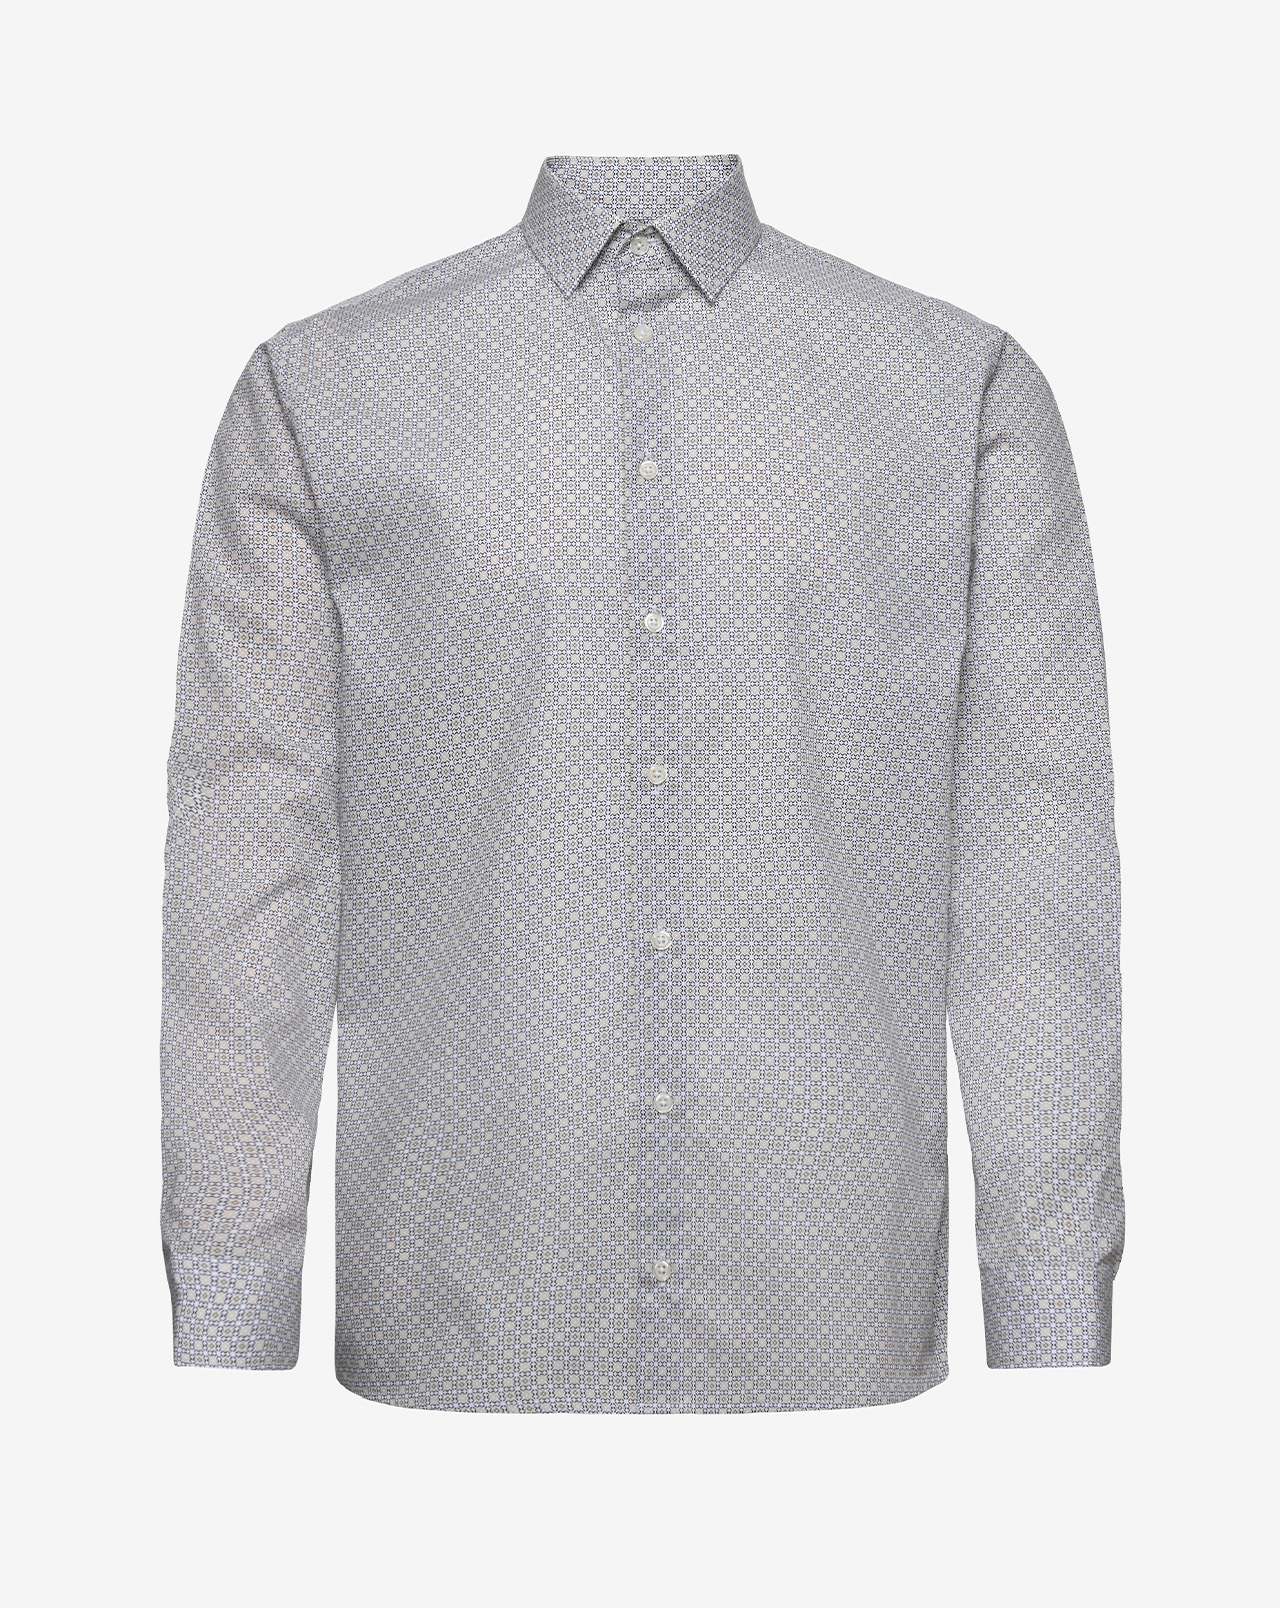 The ultimate guide to buying the shirt